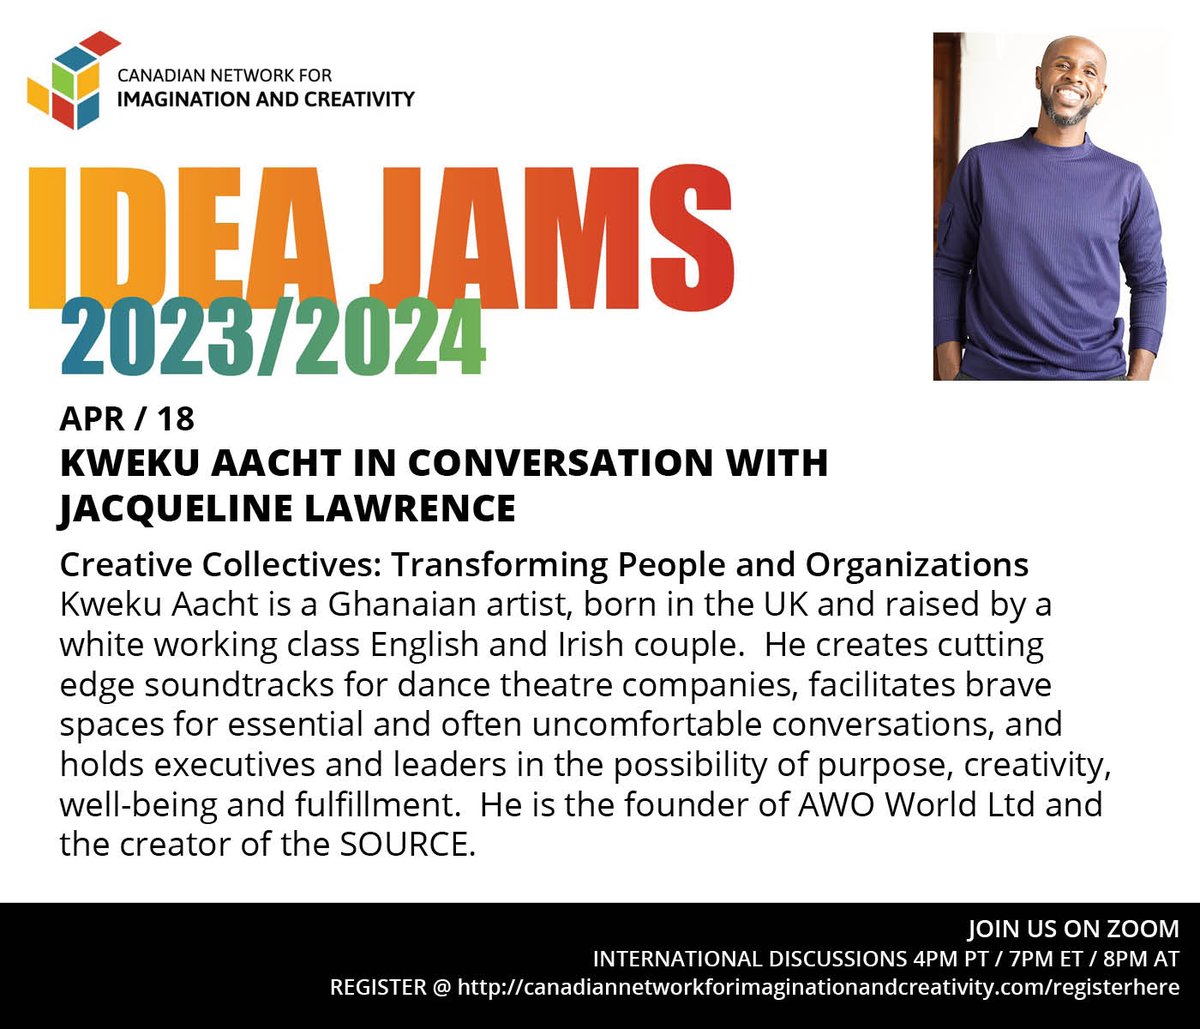 Interested about getting involved in an International discussion. Join in the conversation, create, and play around in your imagination! Follow the link to get registered. …etworkforimaginationandcreativity.com/registerhere #IAMCreative #WorldCreativity